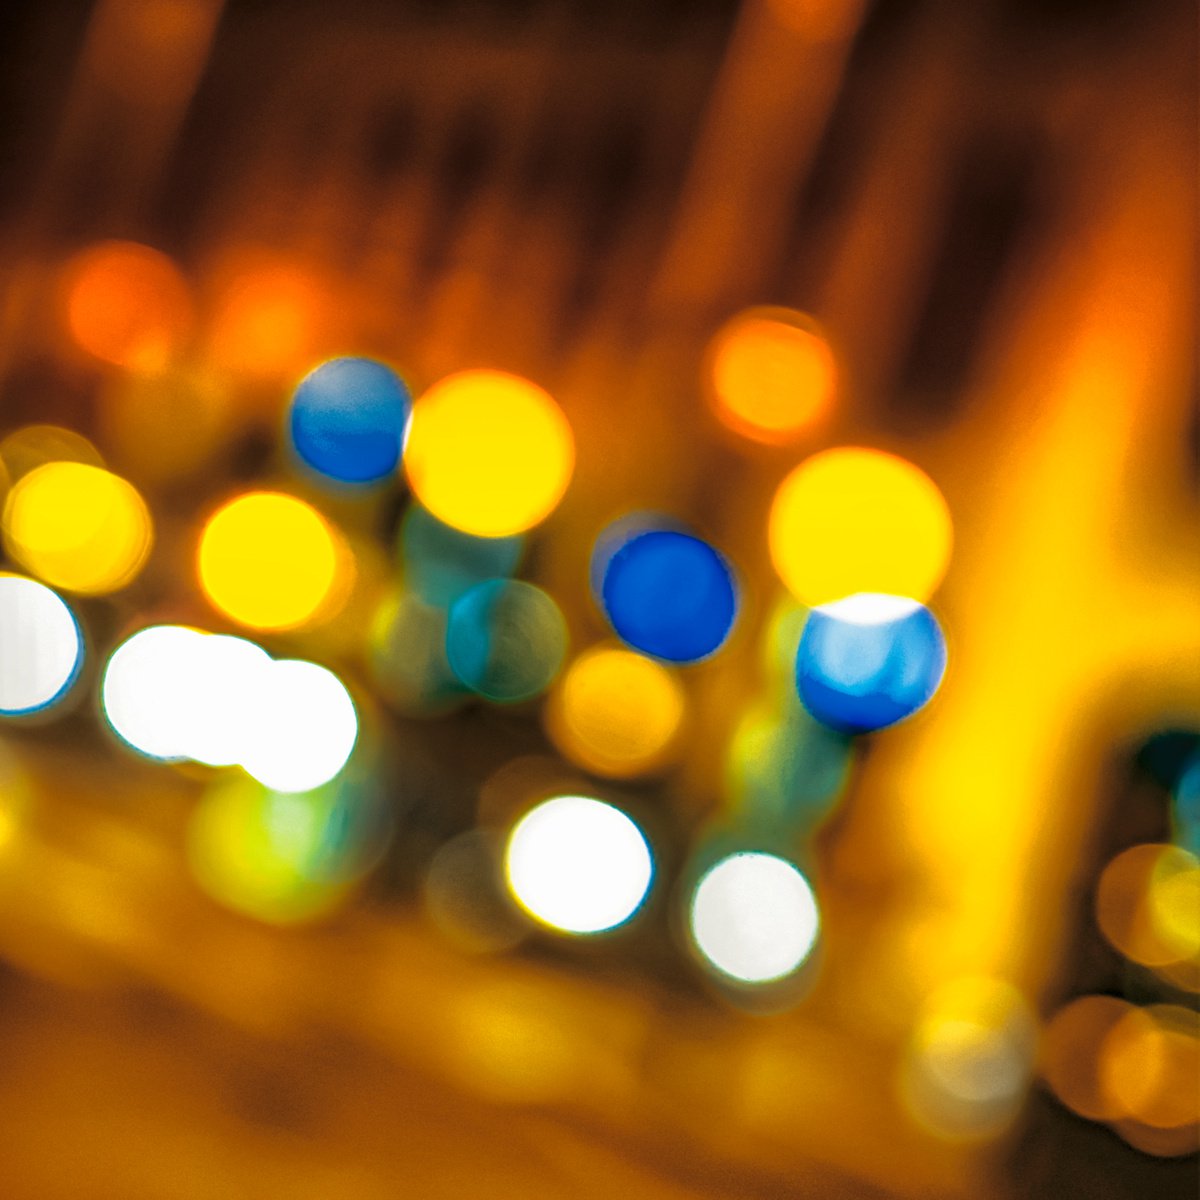 City Lights 3. Limited Edition Abstract Photograph Print #1/15. Nighttime abstract photog... by Graham Briggs